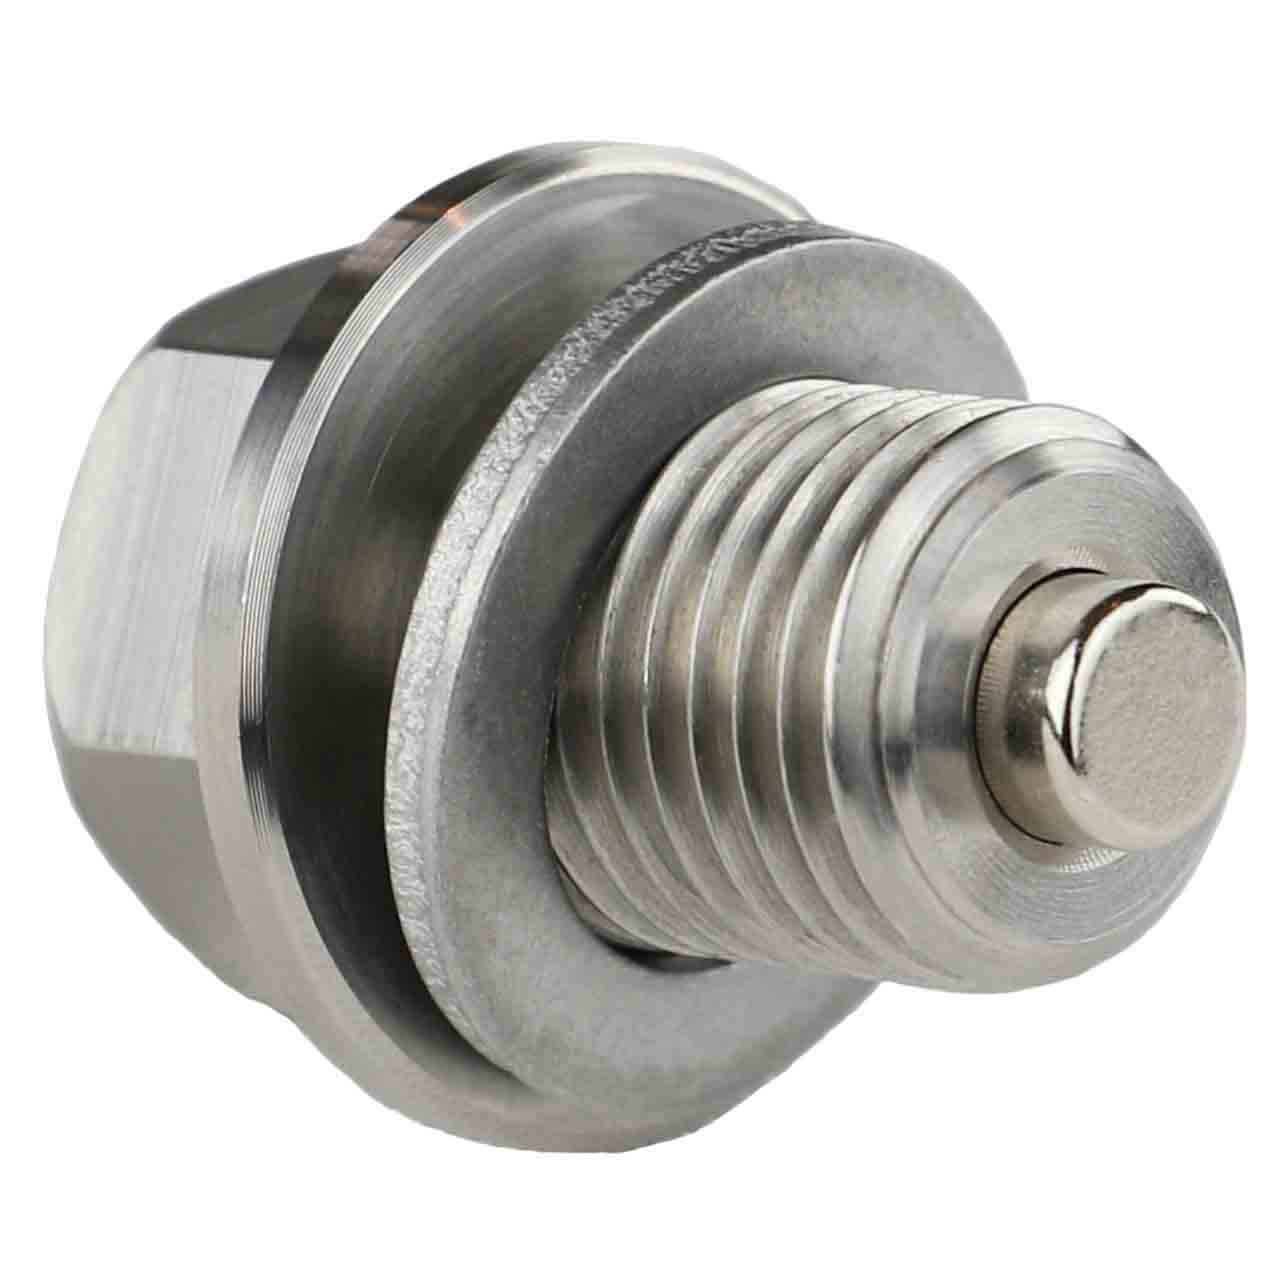 90082-PR8-000 for Honda - Stainless Steel Magnetic Oil Drain Plug with Neodymium Magnet - Made In USA